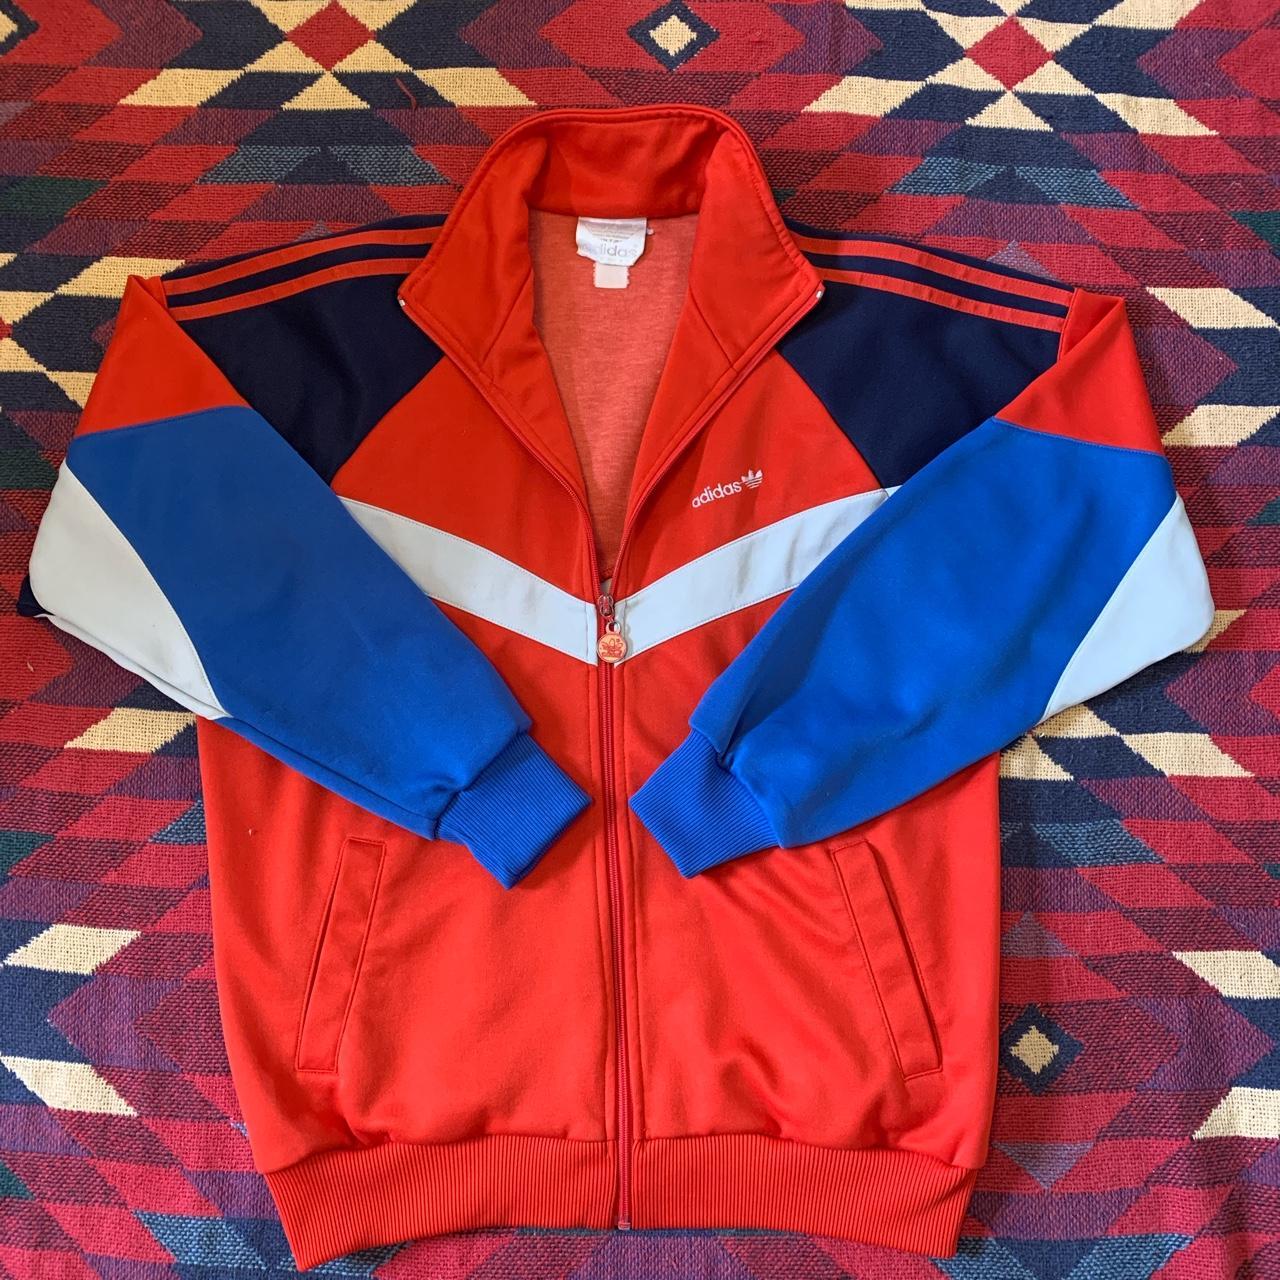 Vintage adidas jacket red and blue 1960s - 1970s...